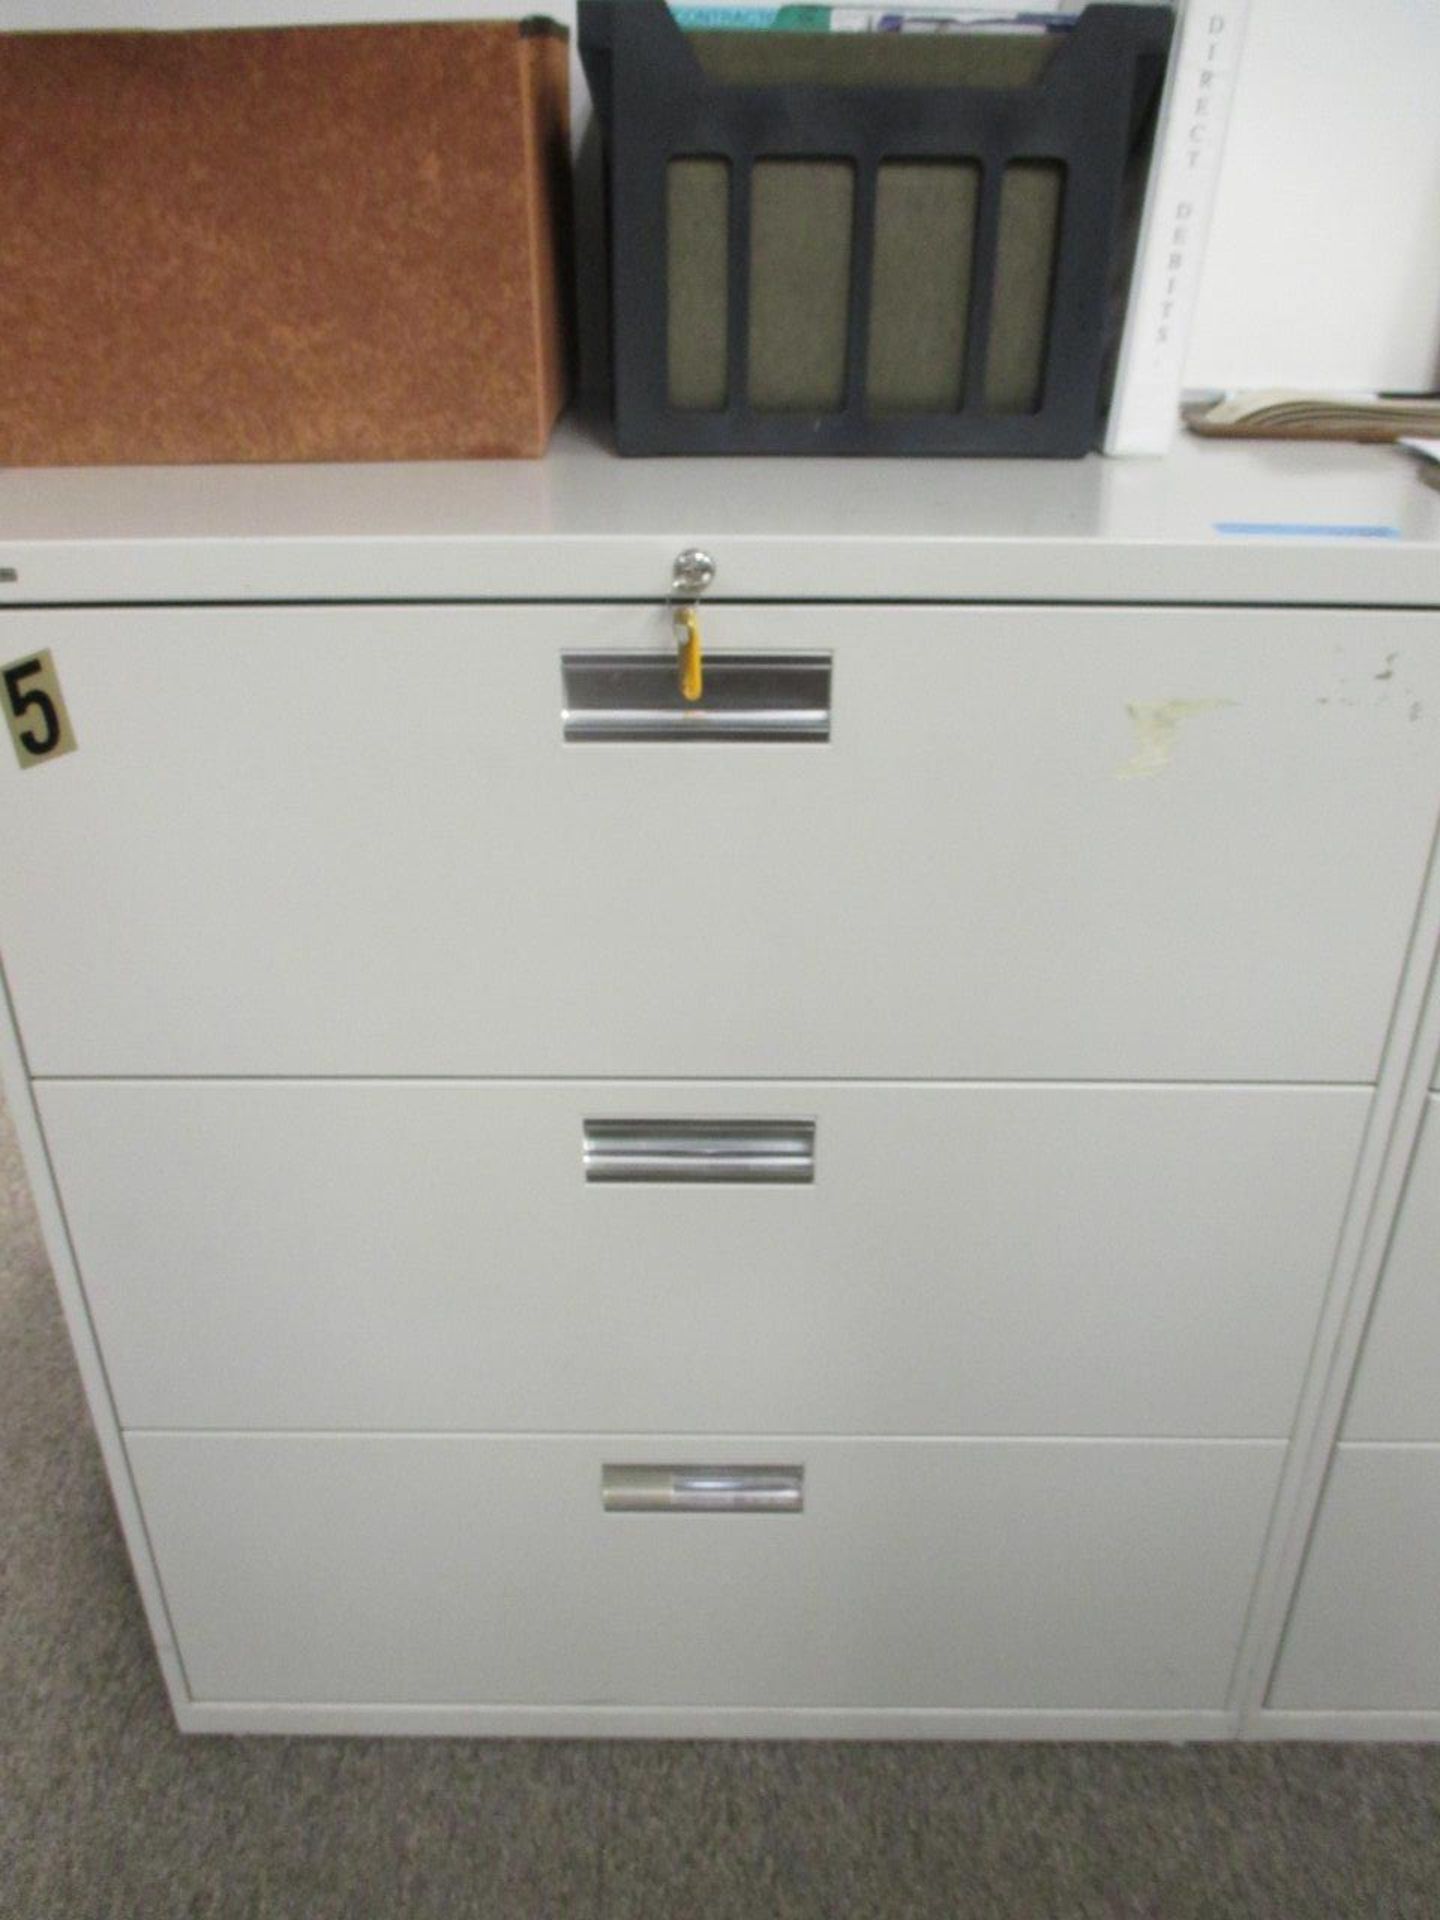 Lateral 3 Drawer Filing Cabinet